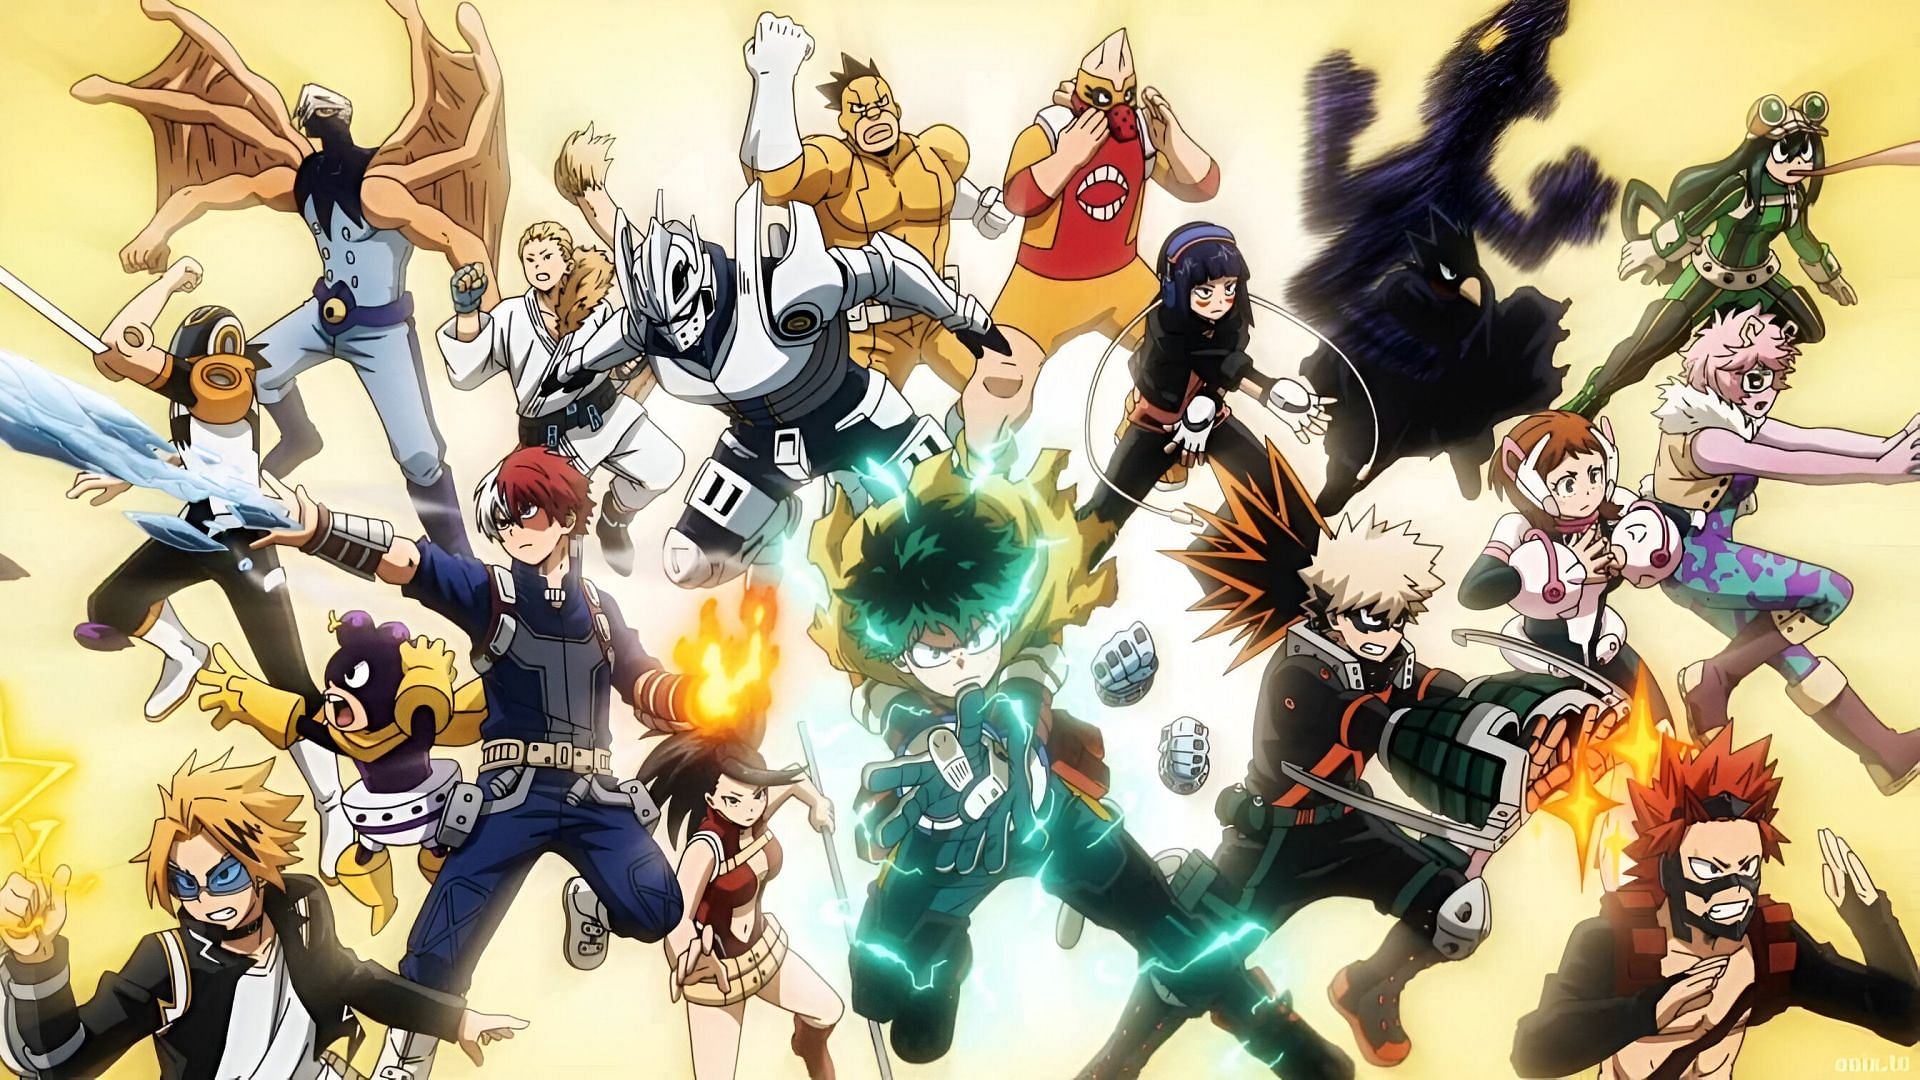 Class 1-A new visual as seen in the episode (Image via Bones)